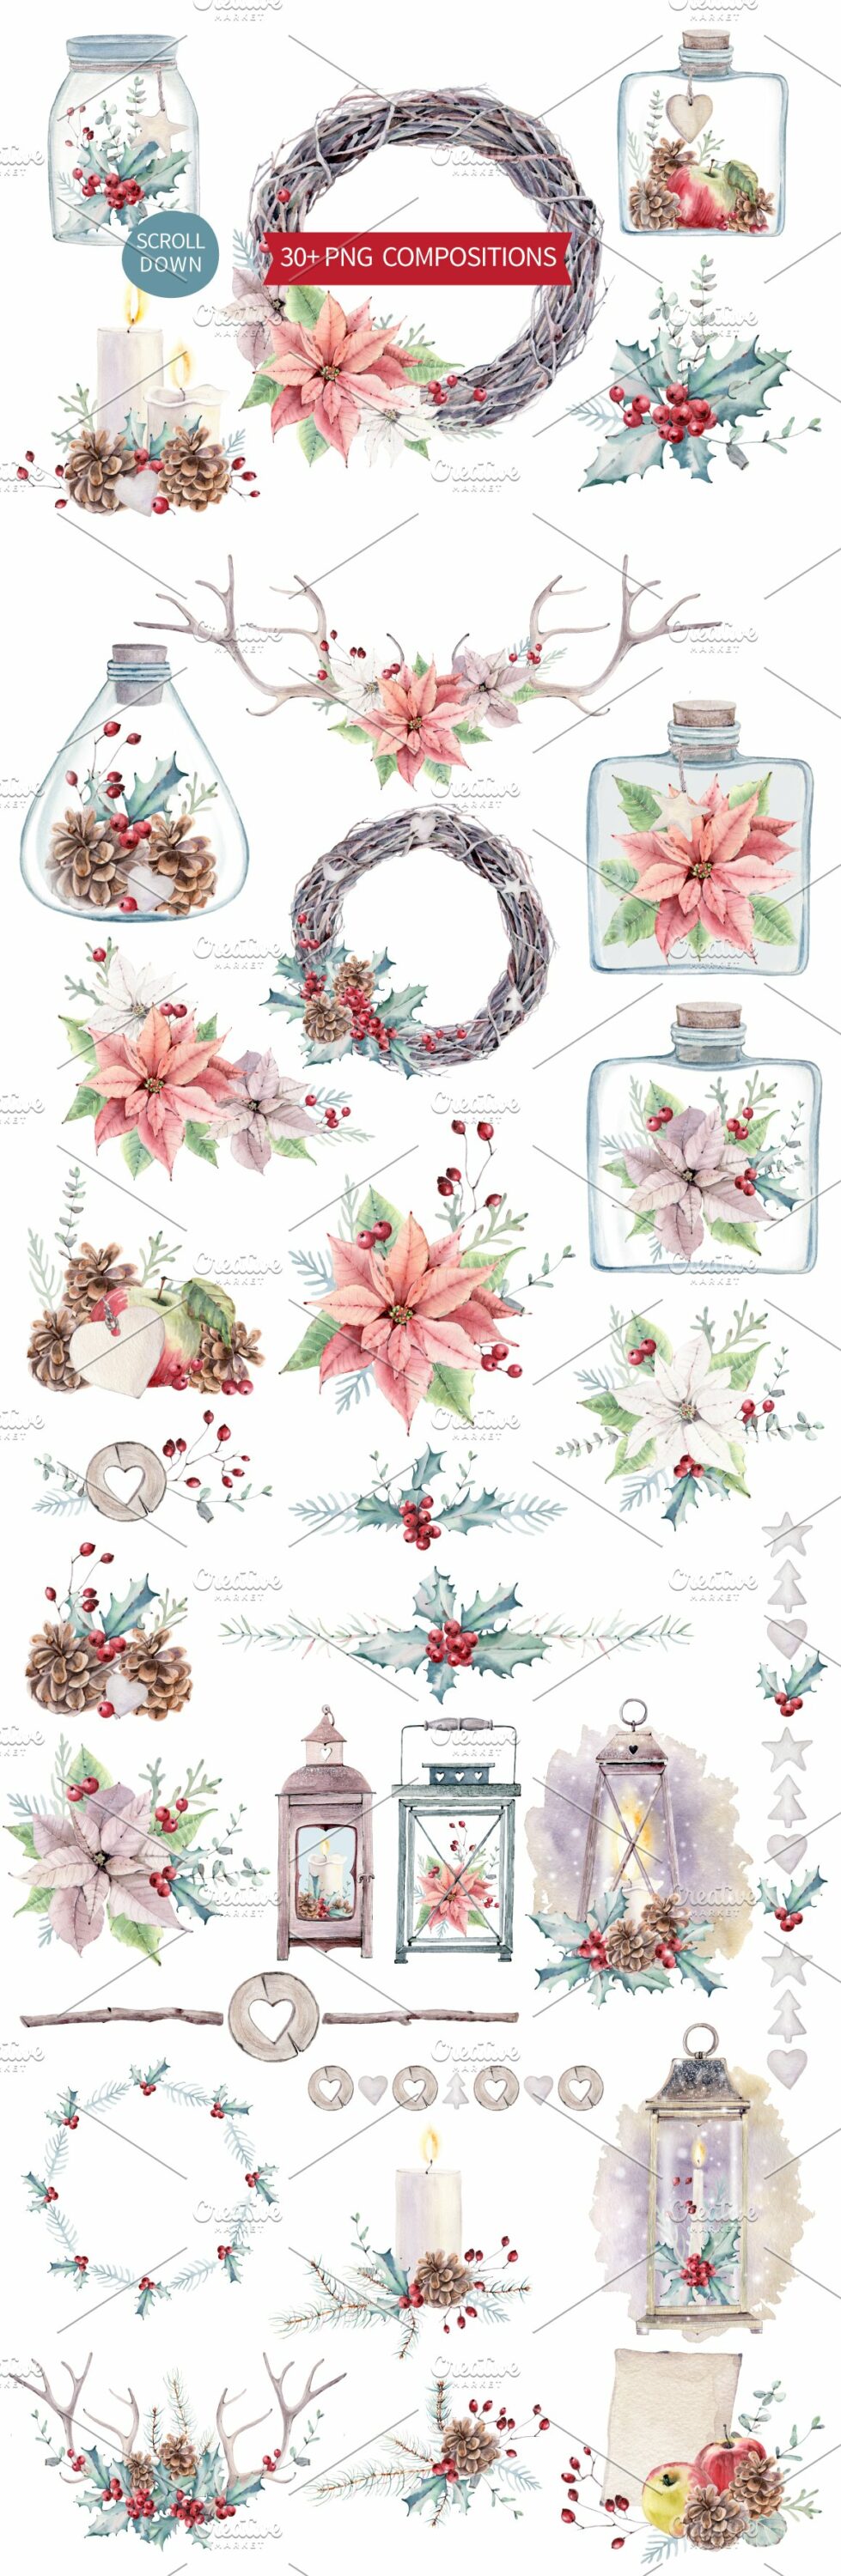 A set of 30+ different christmas compositions on a white background.